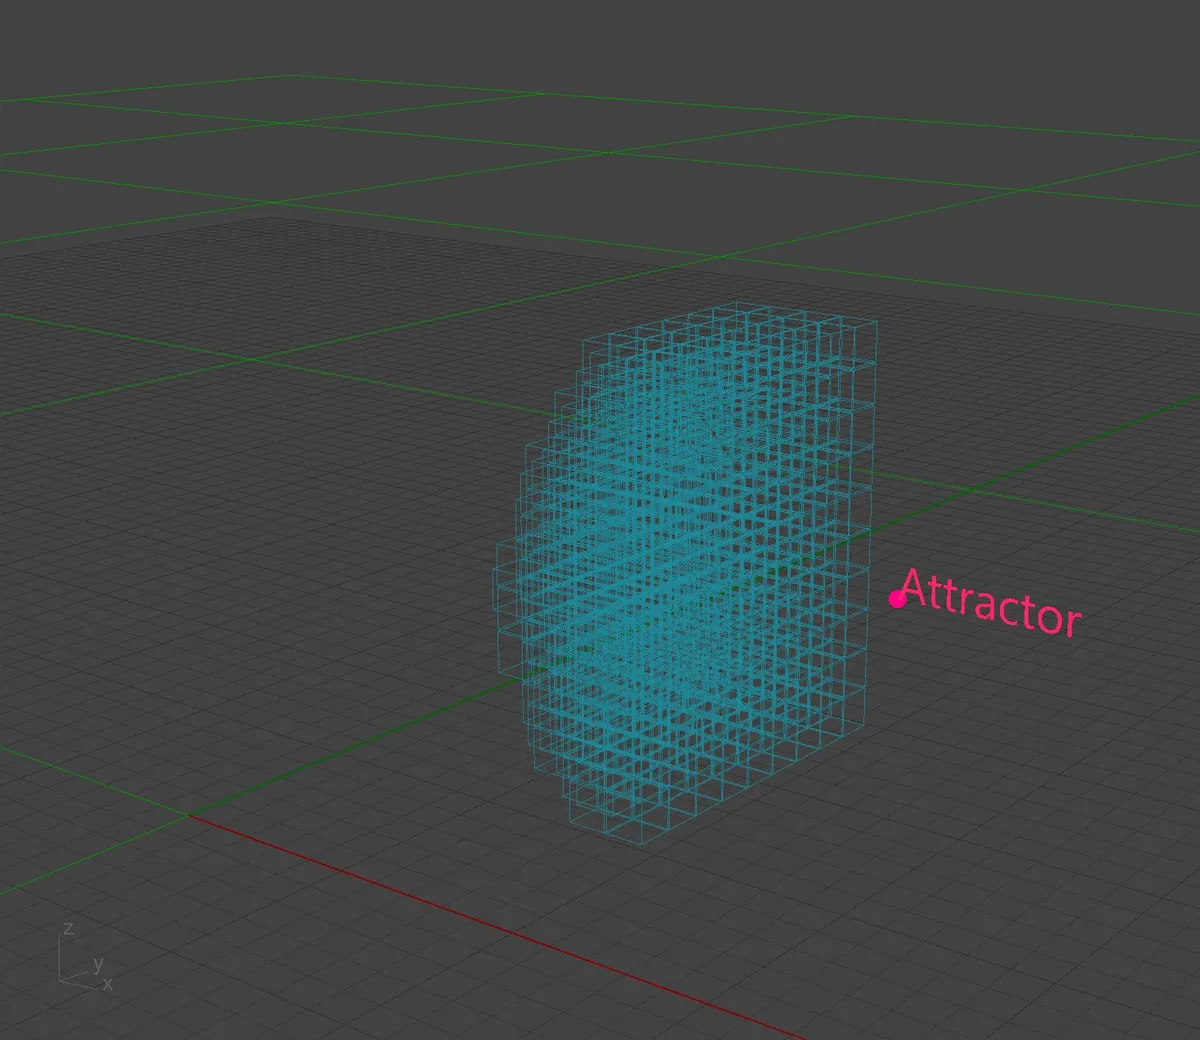 Allowing / Disallowing Modules based on attractor - All